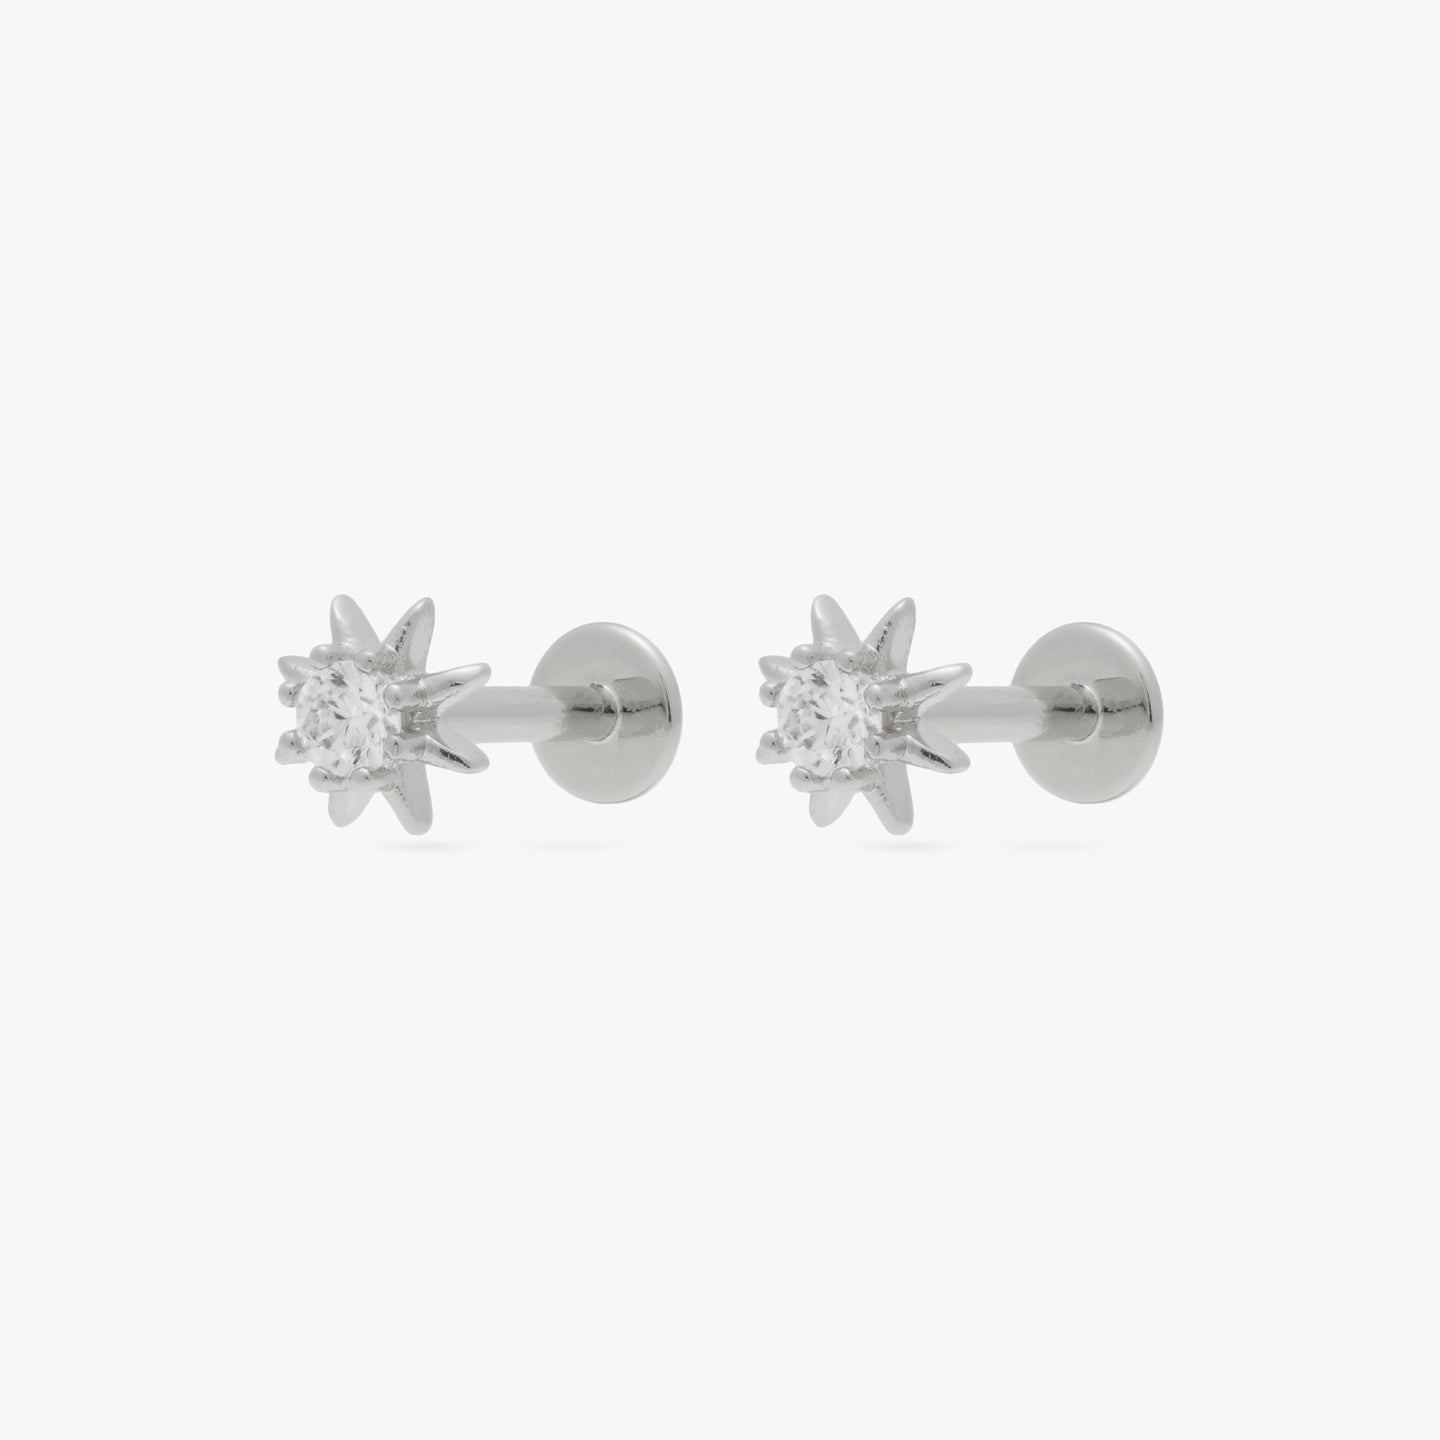 A silver starburst stud with a clear cz and flatback post [pair] color:null|silver/clear